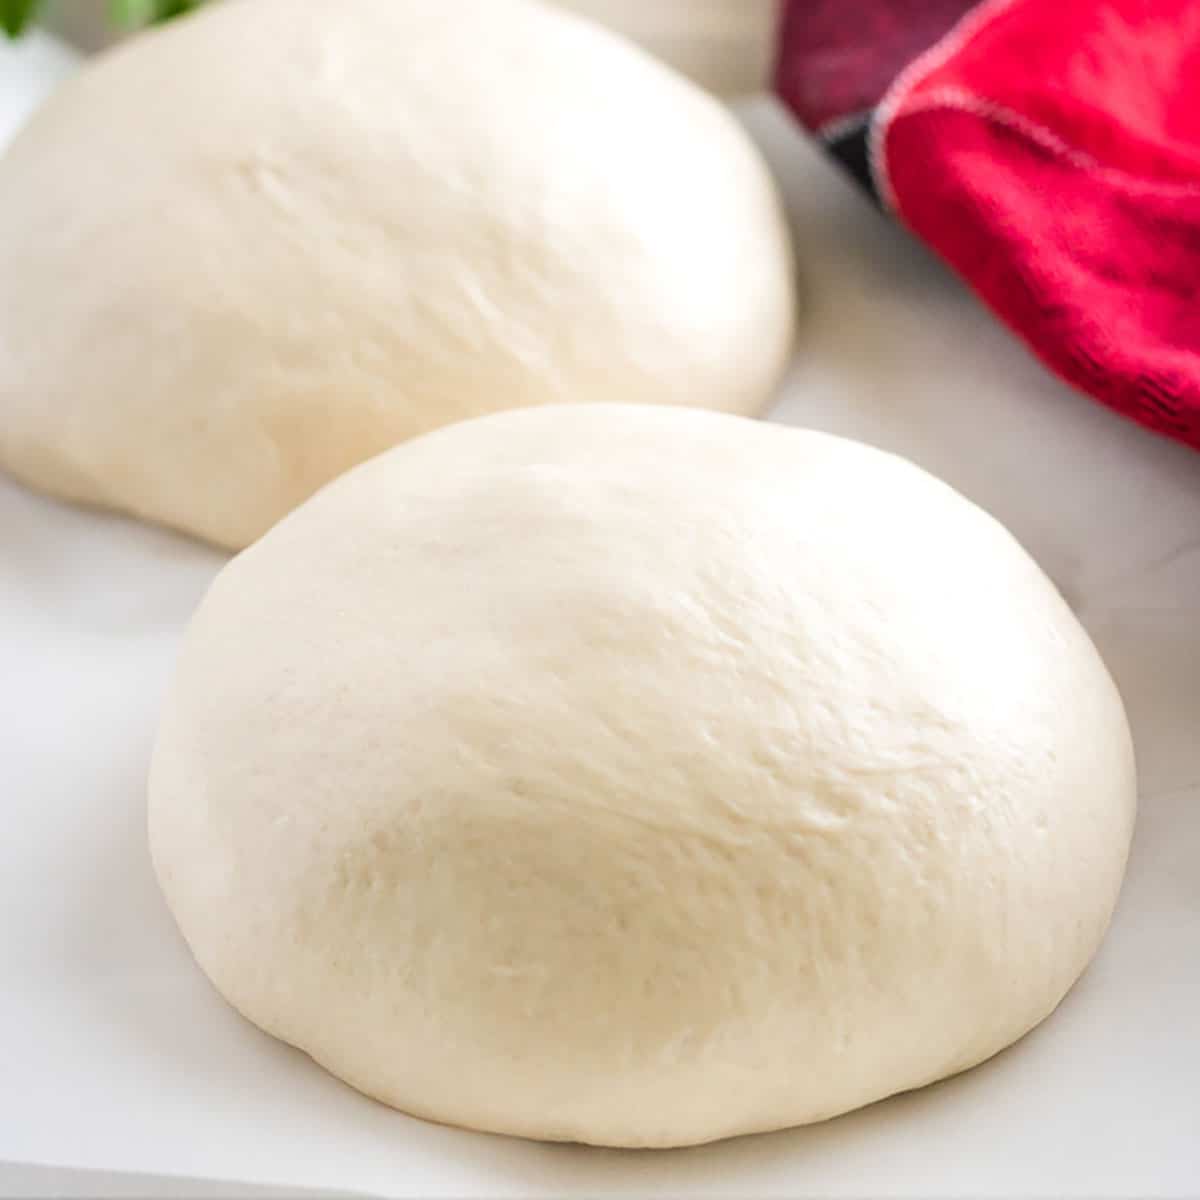 Homemade pizza dough on a piece of parchment paper.